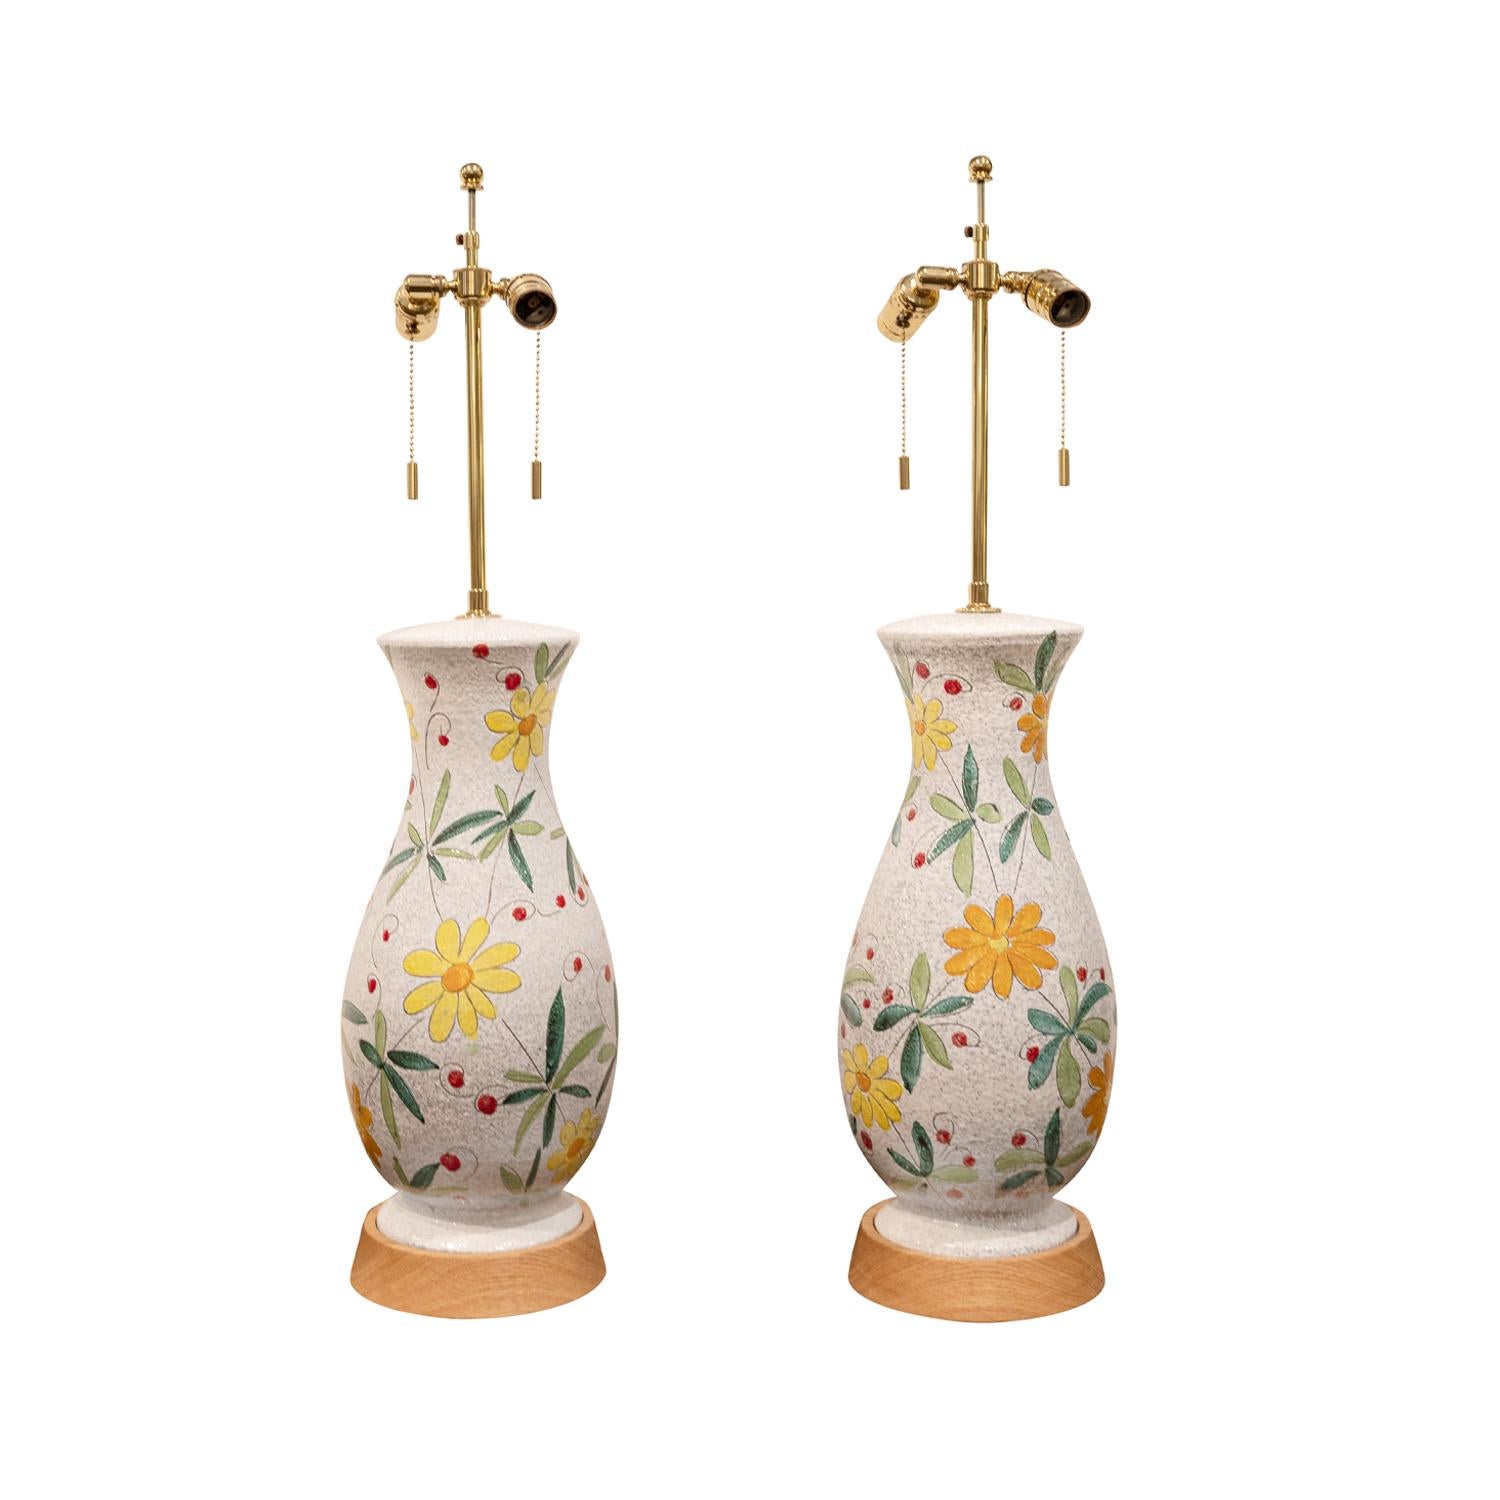 Mid-Century Modern Italian Pair of Artisan Ceramic Table Lamps with Flower Motif 1950s For Sale